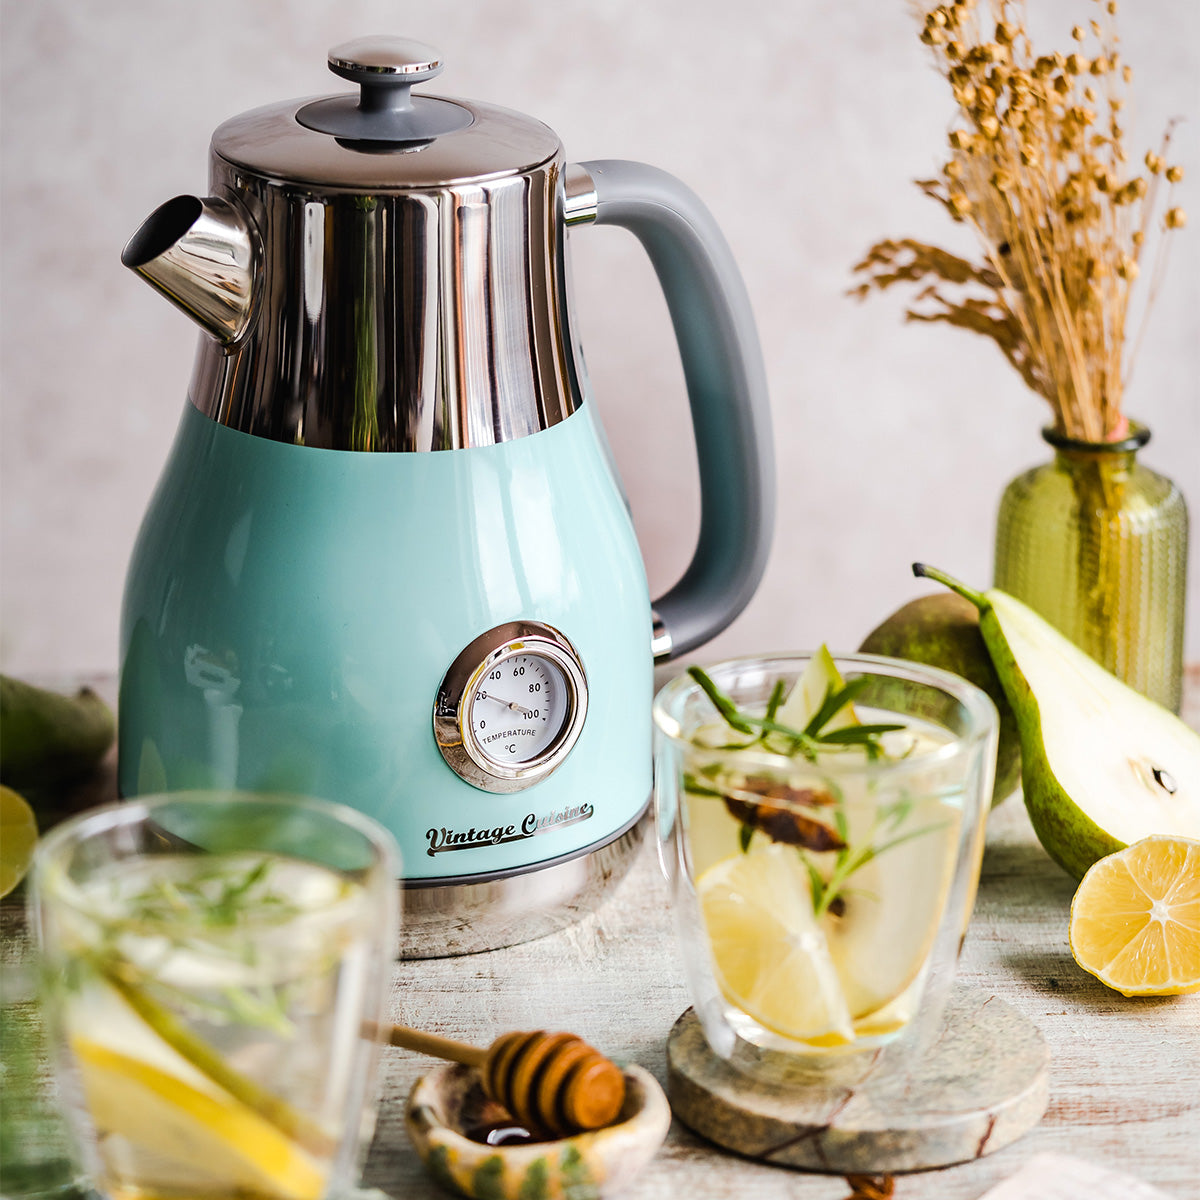 Retro slim electric kettle with thermometer Vintage Cuisine